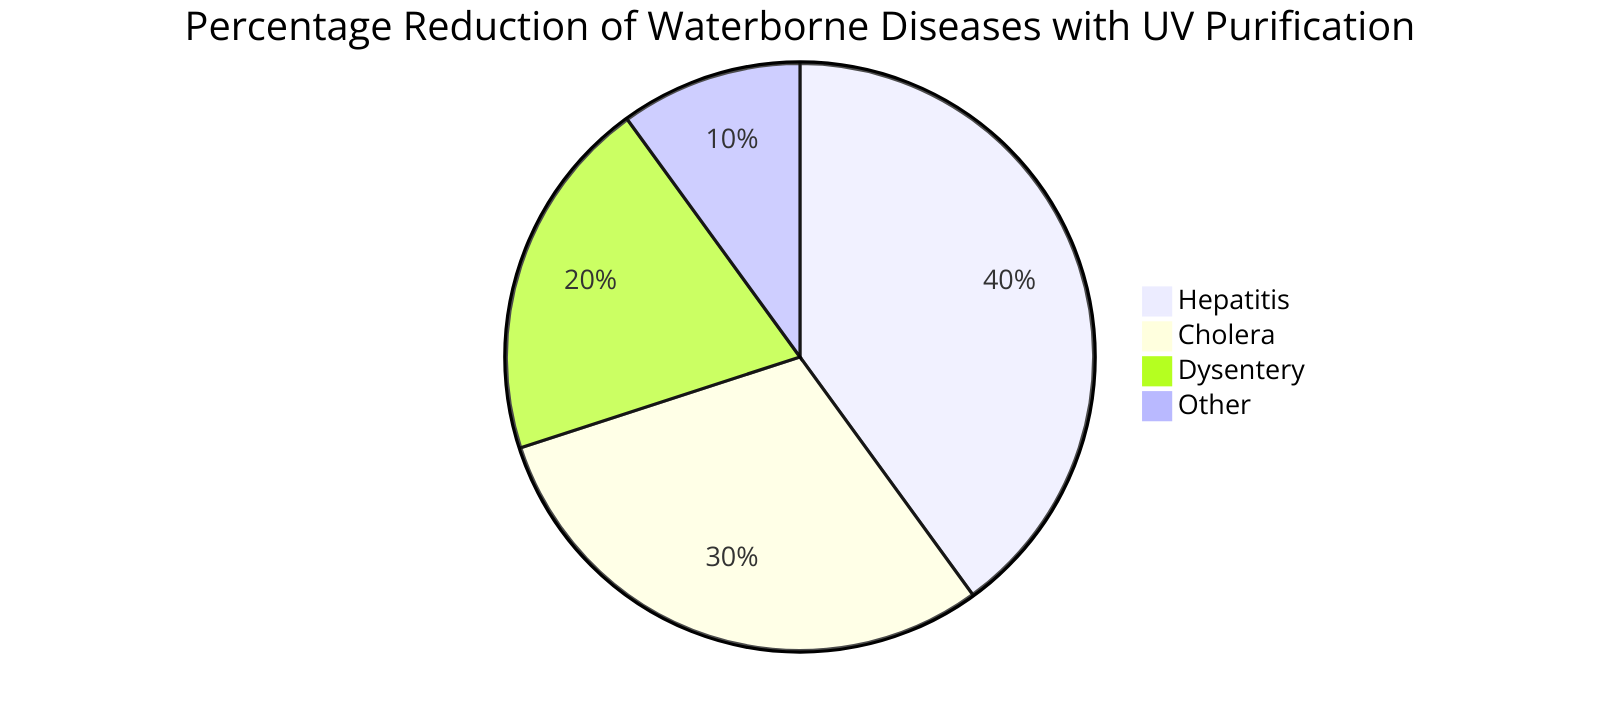 the percentage reduction of waterborne diseases with the use of UV purification in rainwater systems